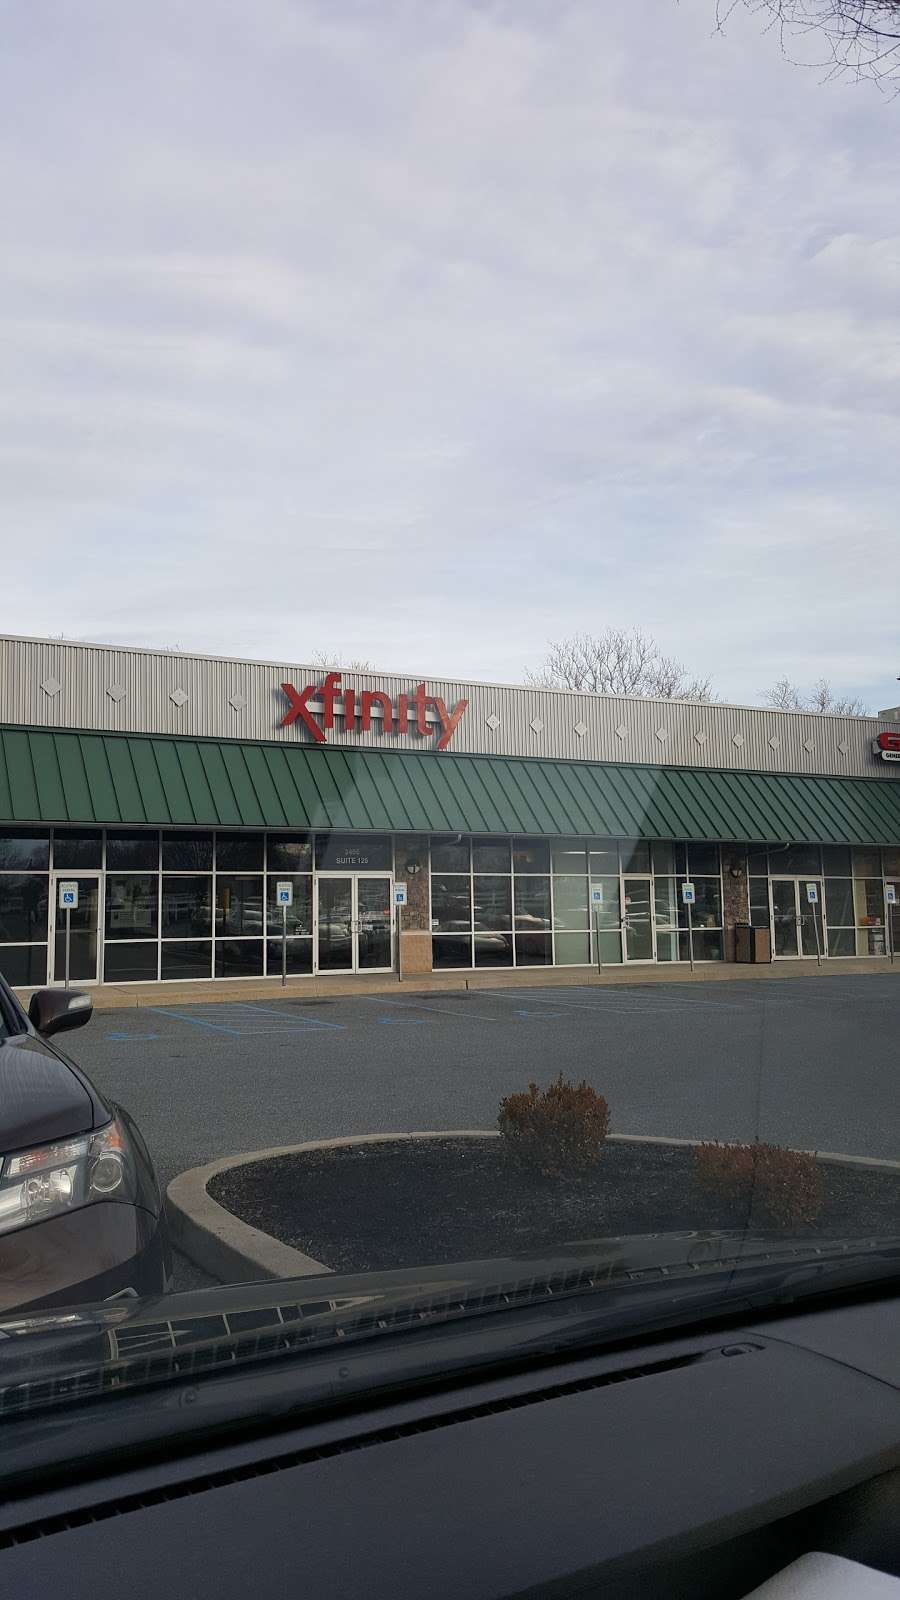 Xfinity Store by Comcast | 2405 Covered Bridge Dr, Lancaster, PA 17602 | Phone: (800) 266-2278